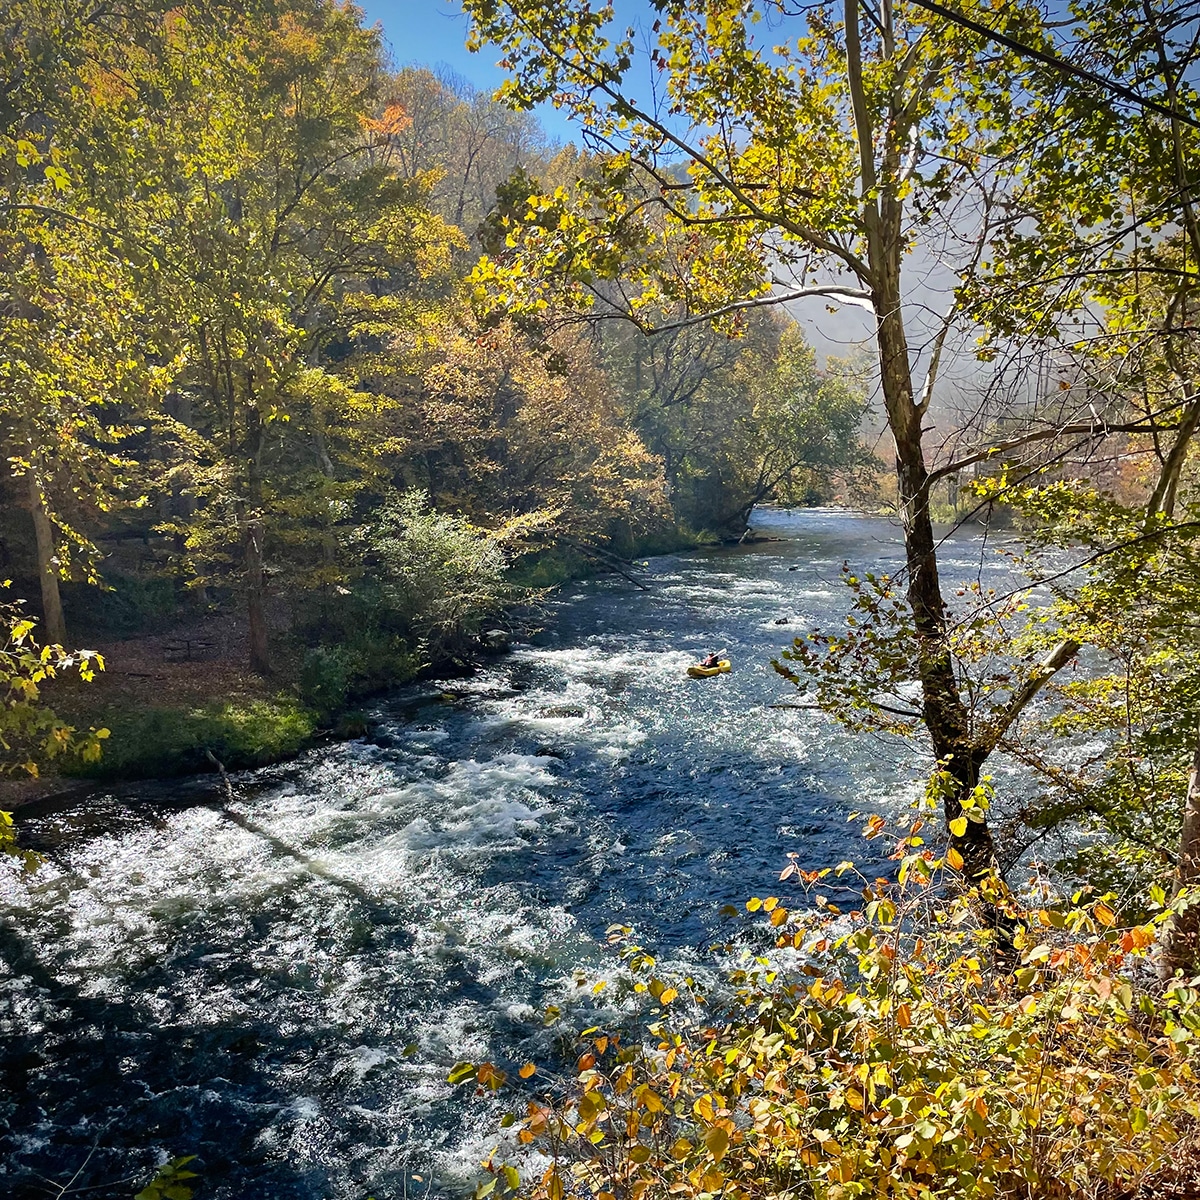 The Nantahala River as seen out the window of the Great Smokey Mountain Railroad.